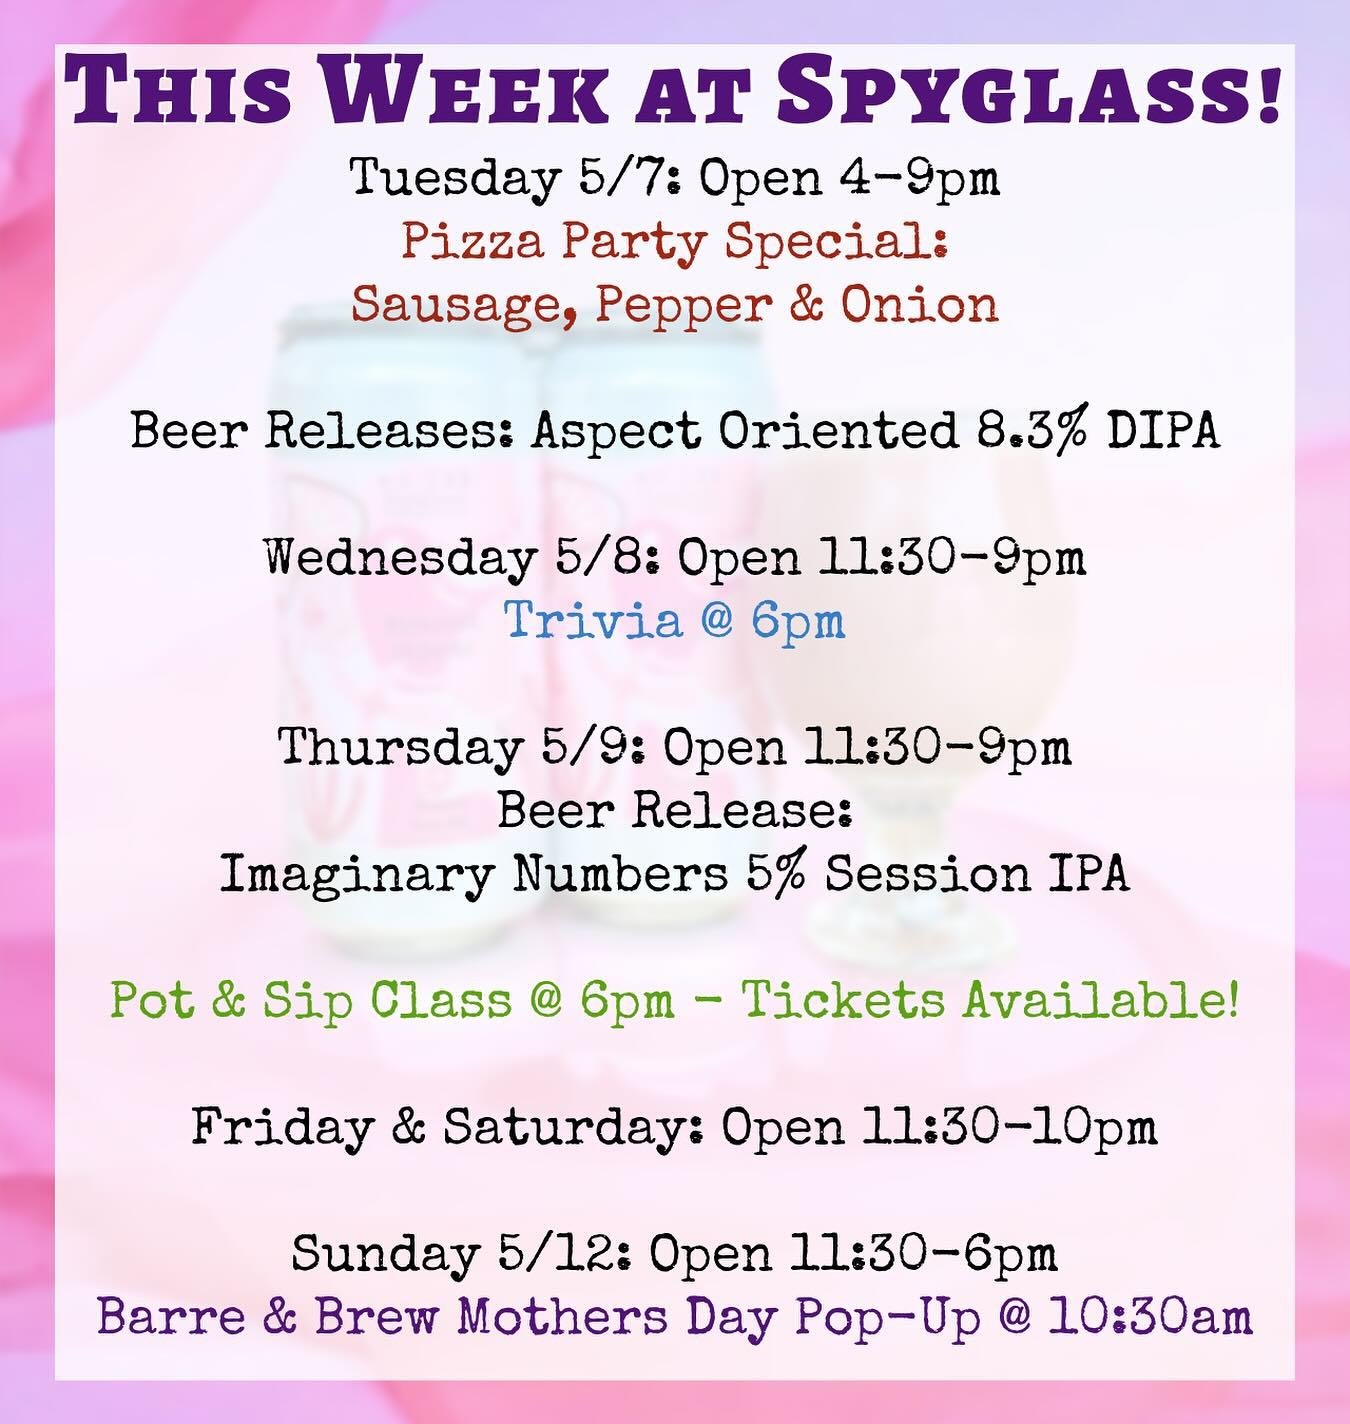 This Week at Spyglass!

Tuesday 5/7 Open 4-9pm 
🍕Chef Special Pizza - Sausage, Pepper &amp; Onion - crumbled hot Italian sausage, roasted red peppers, onion, red sauce, and a spinach pesto

Spyglass Trivia Night at @labnlager in Keene, NH 7-9pm

Wed